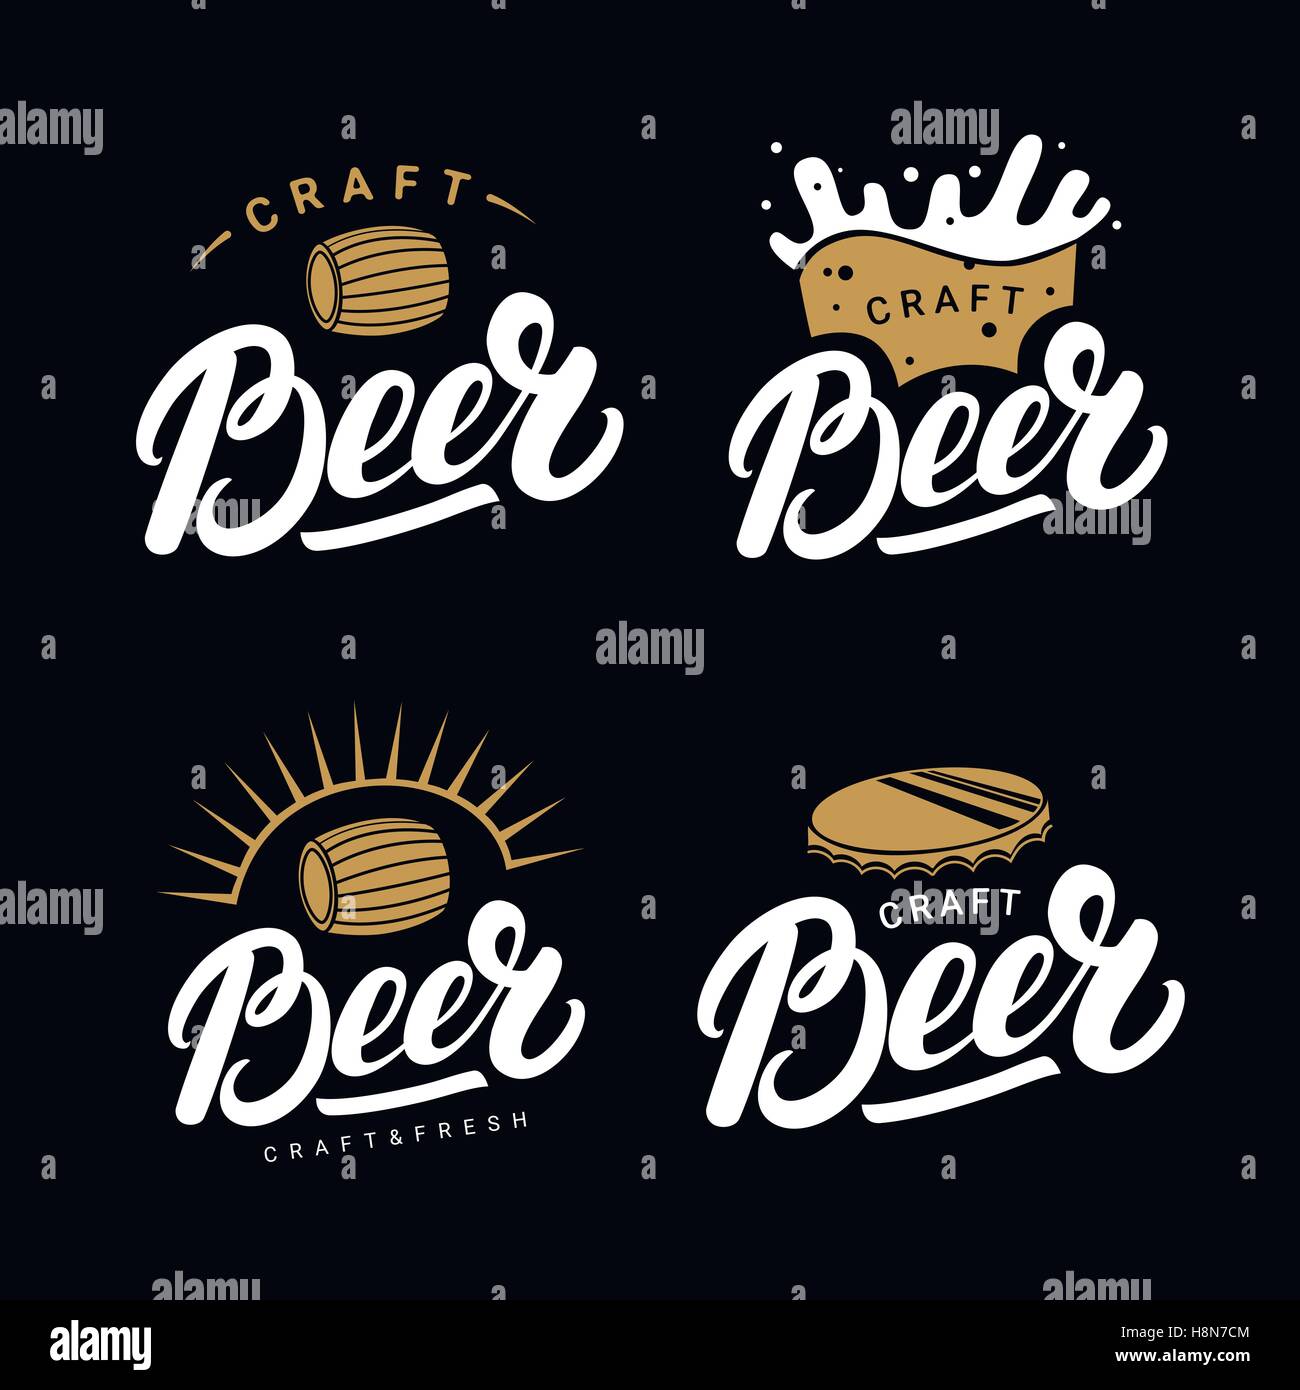 Set of beer hand written lettering logos, labels, badges for beerhouse, brewing company, pub, bar. Stock Vector